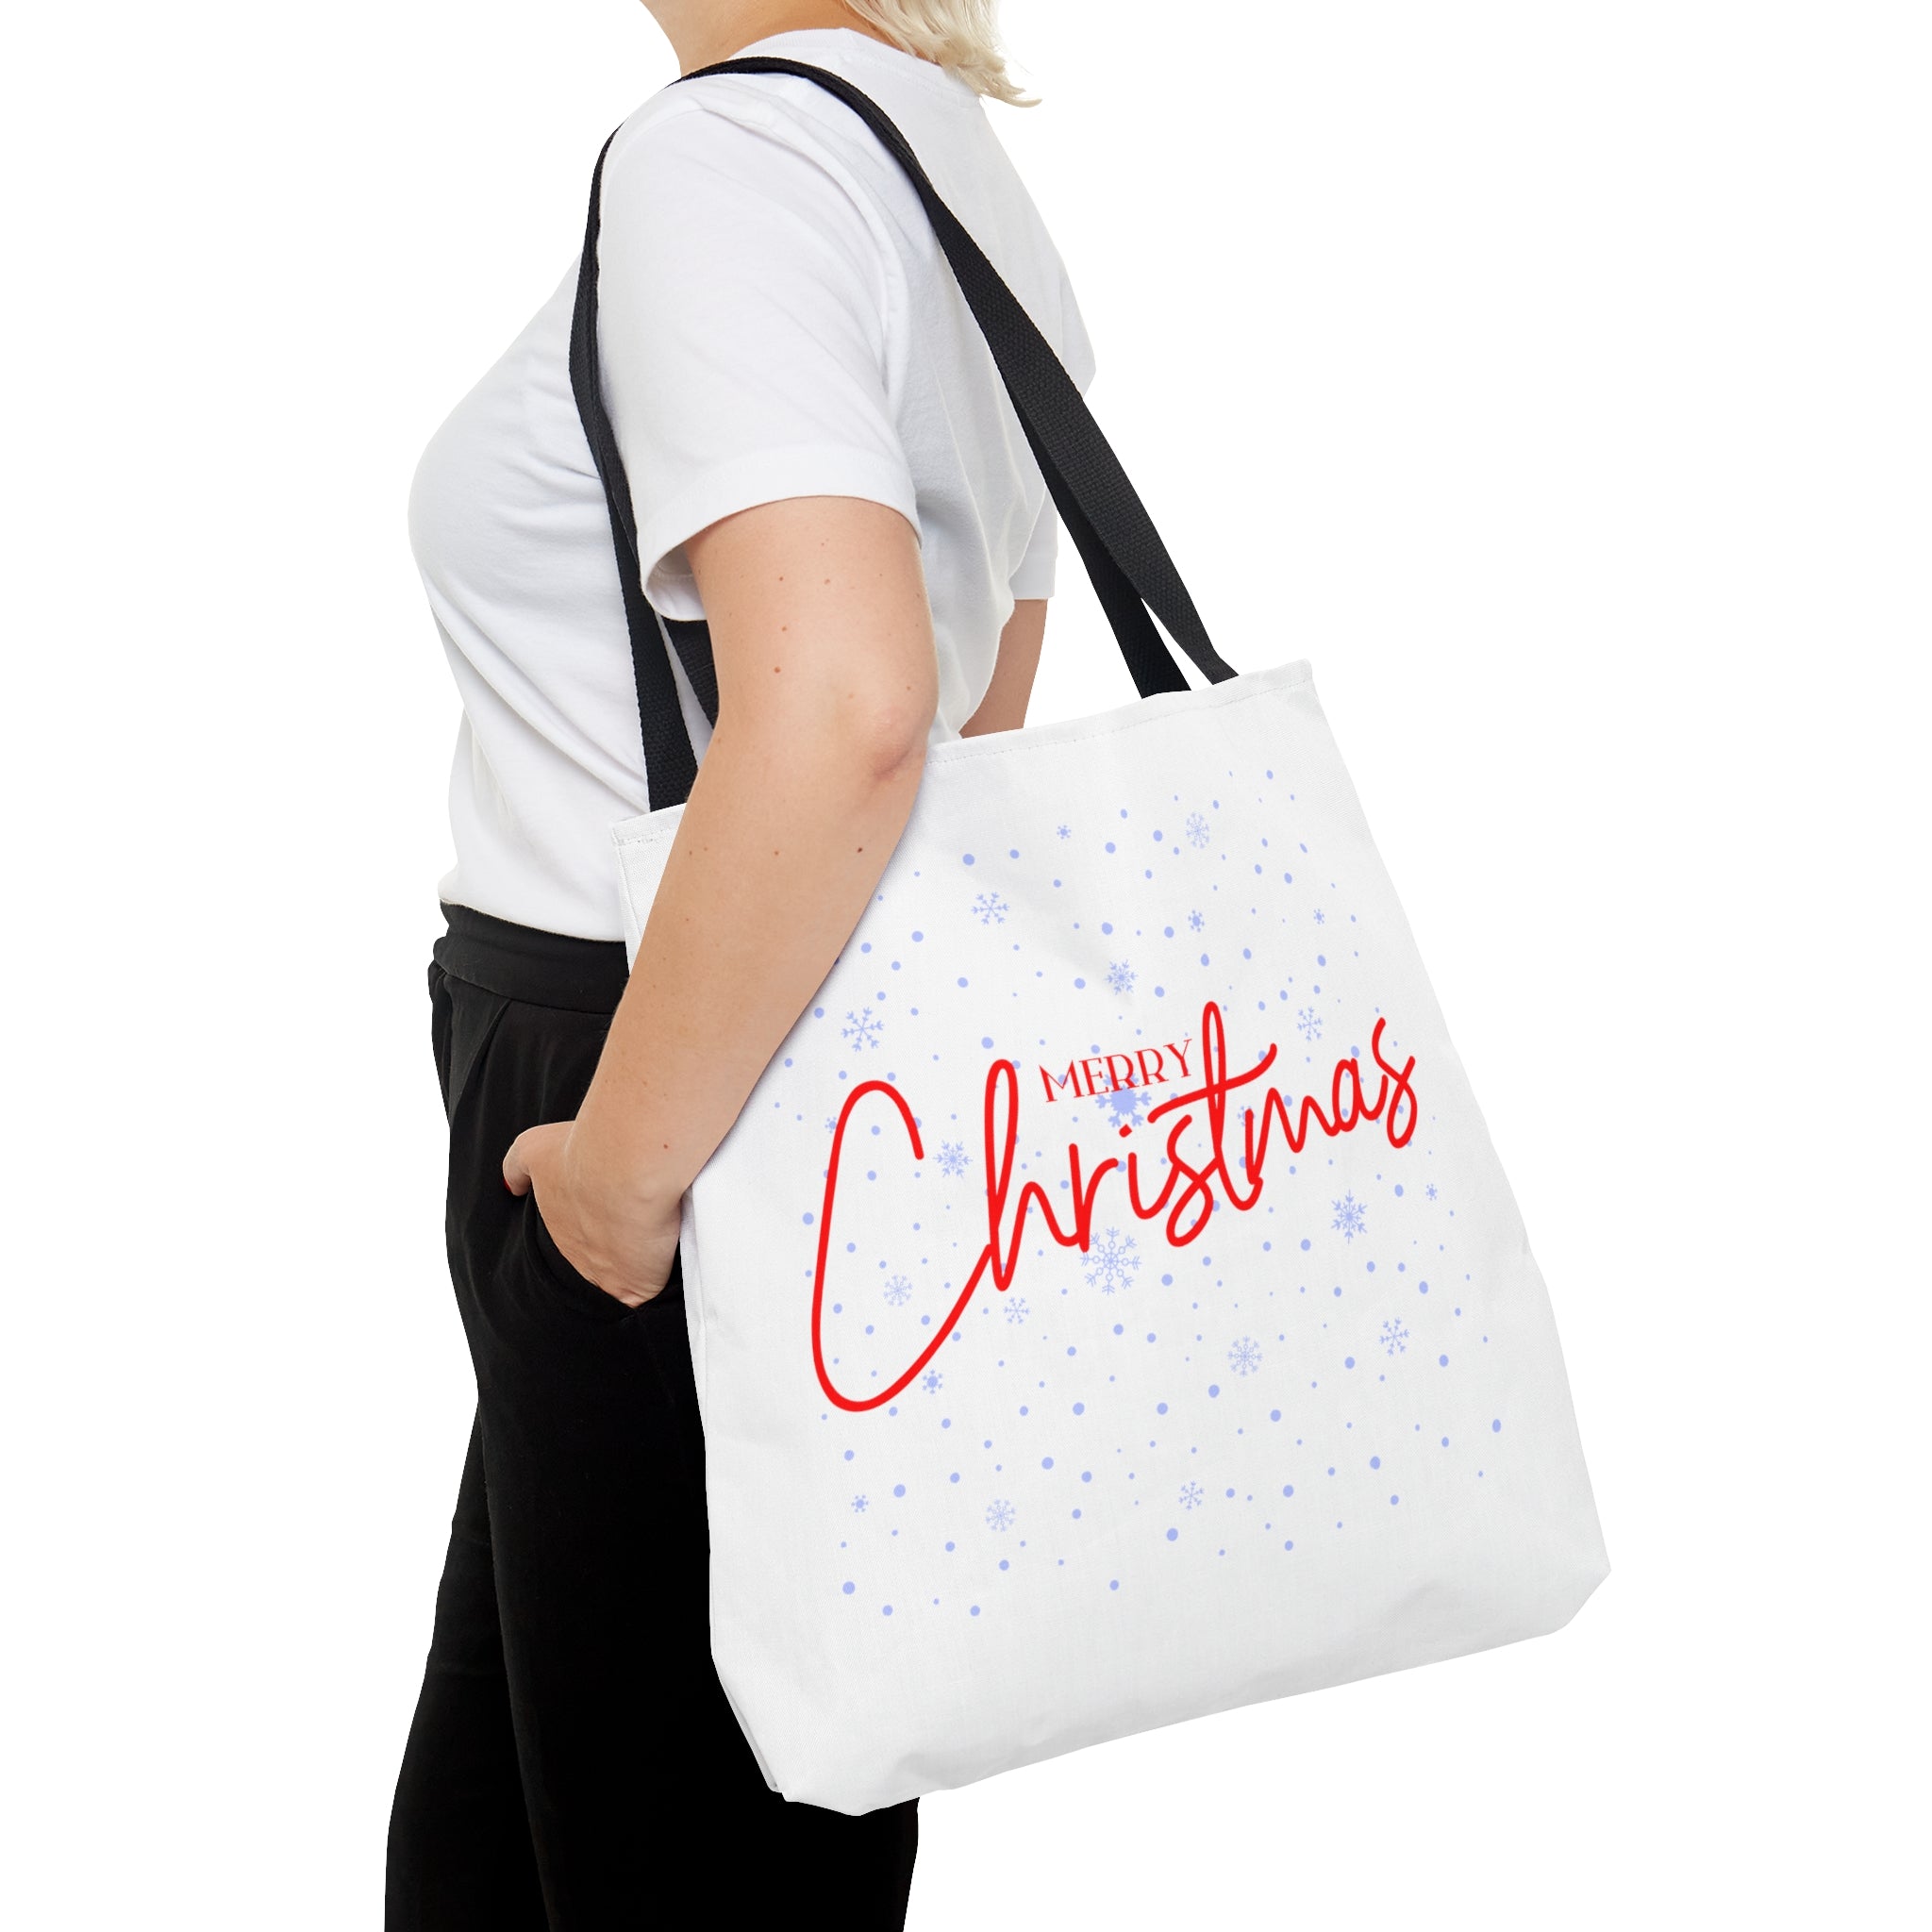 Merry Christmas Tote Bags, Reusable Canvas Tote Bags, Available in Different Size